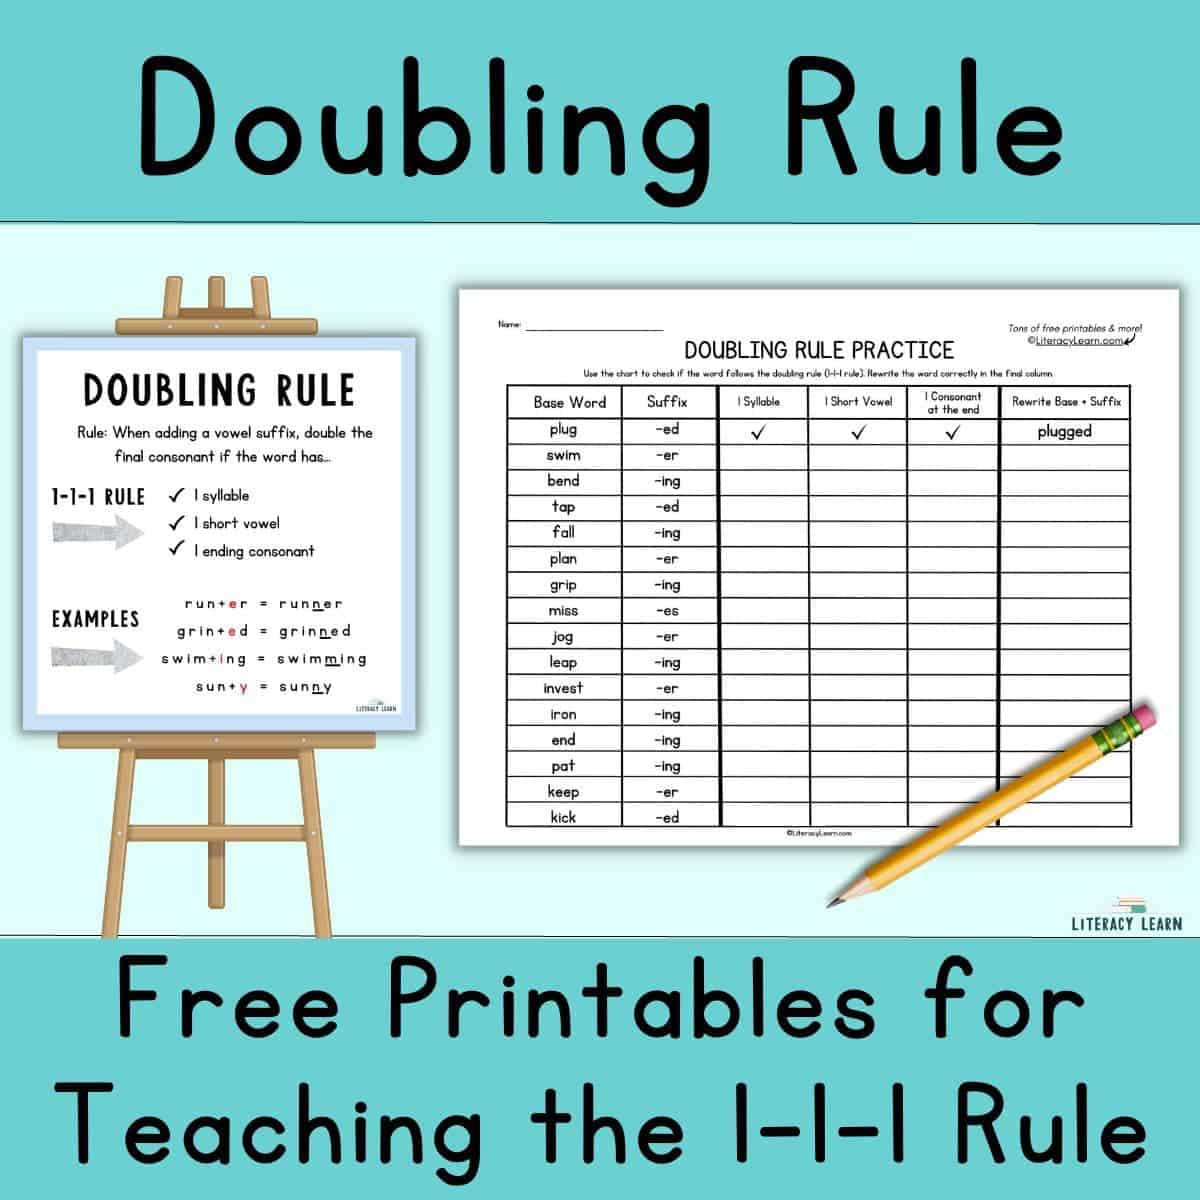 Blue graphic entitled "Doubling Rule" with pictures of two free printables, a easel, and a pencil.